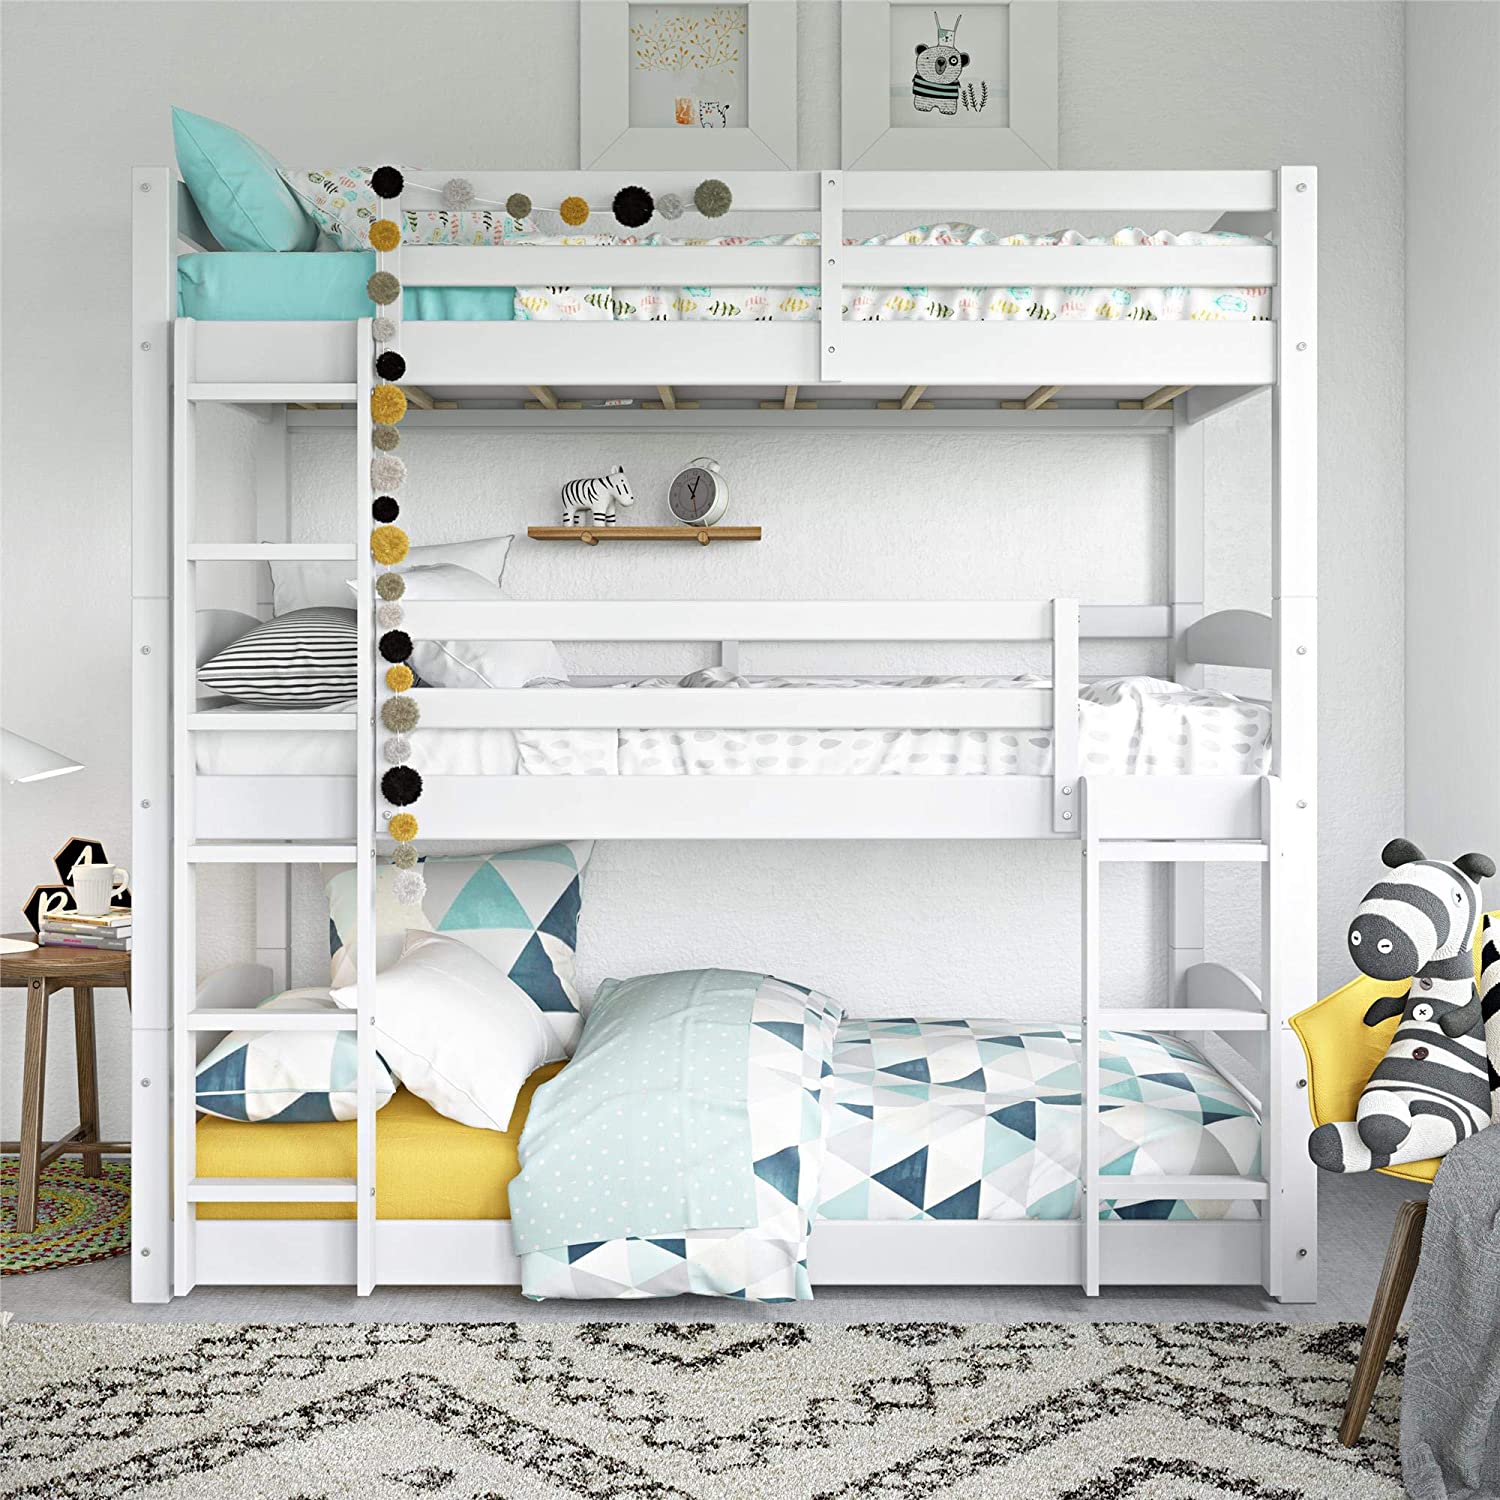 26 Bunk Beds You Ll Want For Yourself, Kids Bunk Bed Designs